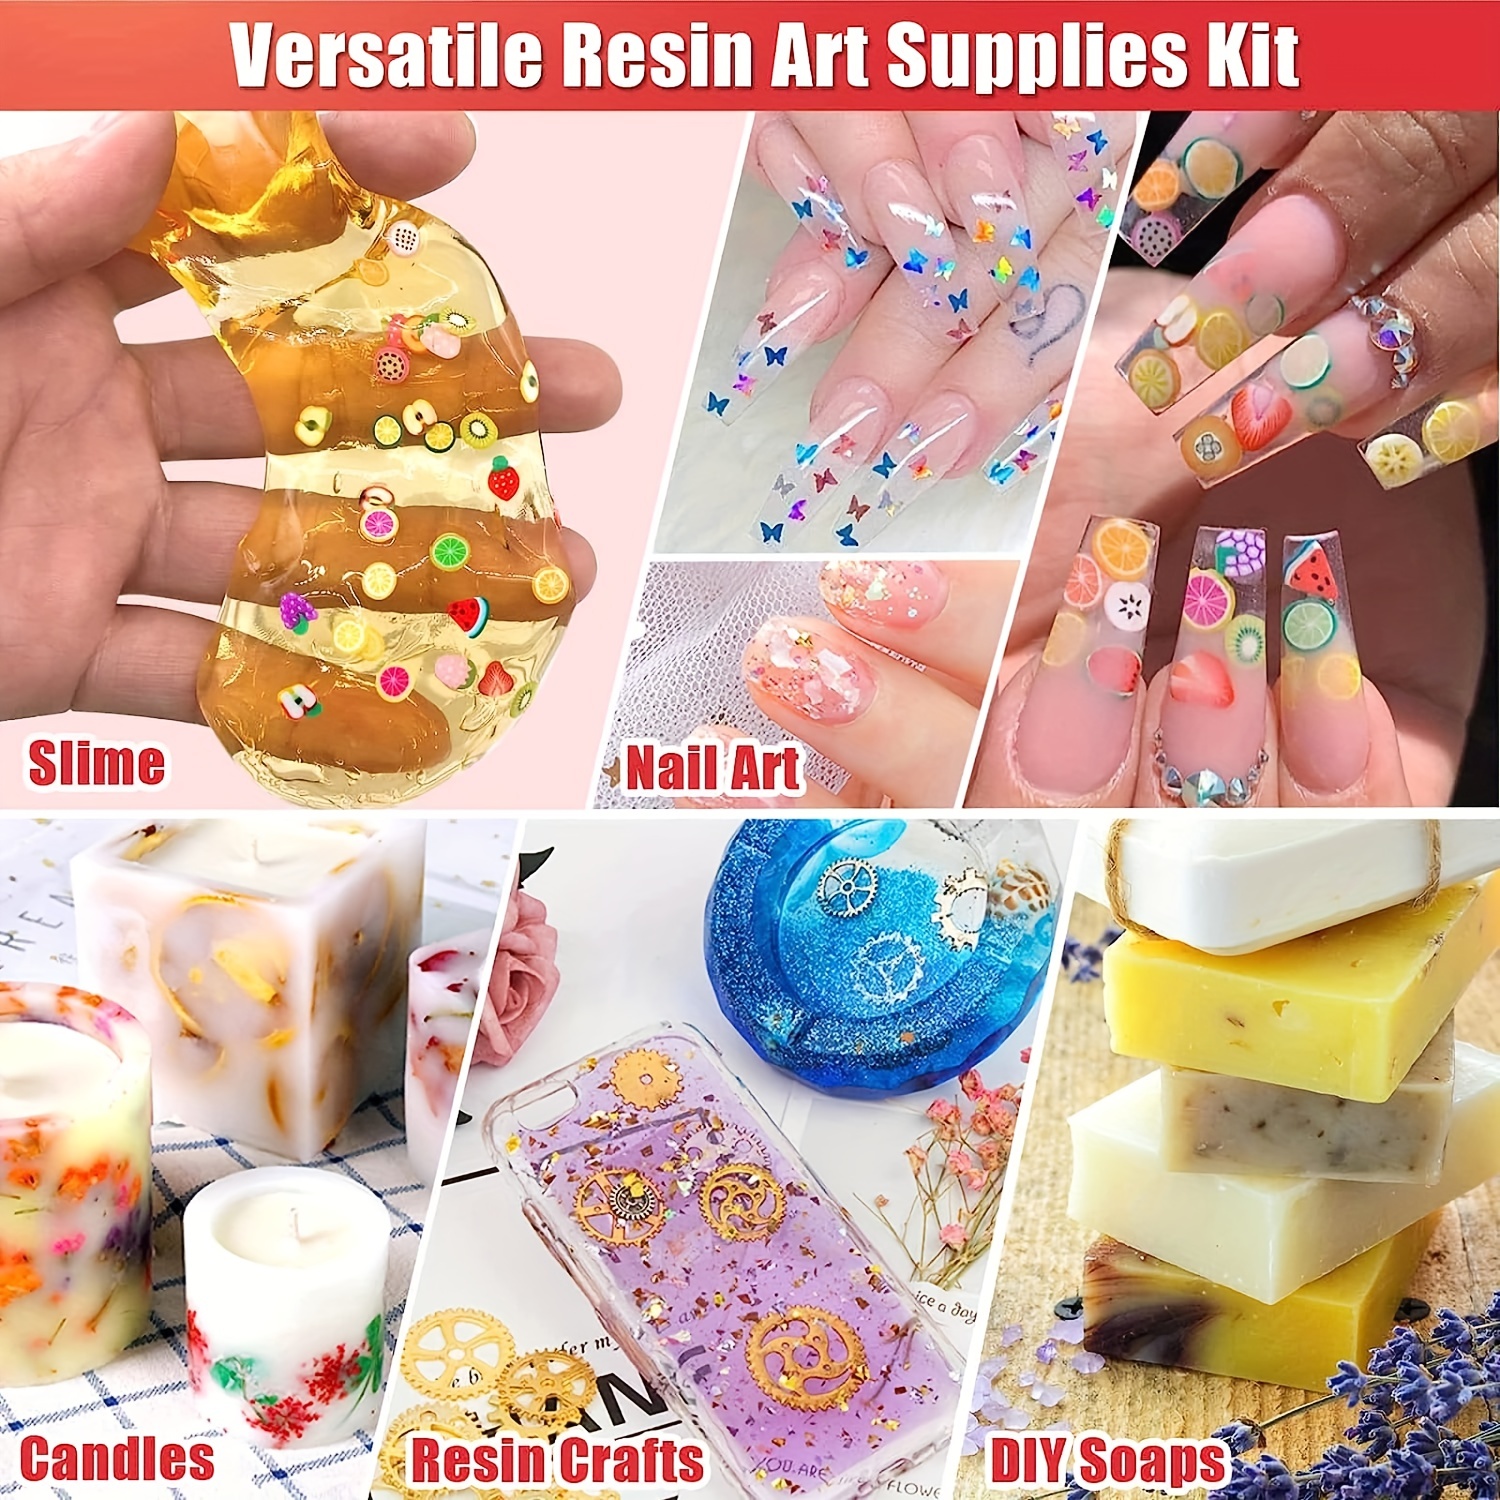 Anezus 178 Pack Resin Jewelry Making Supplies Kit for Resin, Slime, Nail  Art, Resin Art Supplies Jewelry Making Kit with Resin Glitter, Wheel Gears